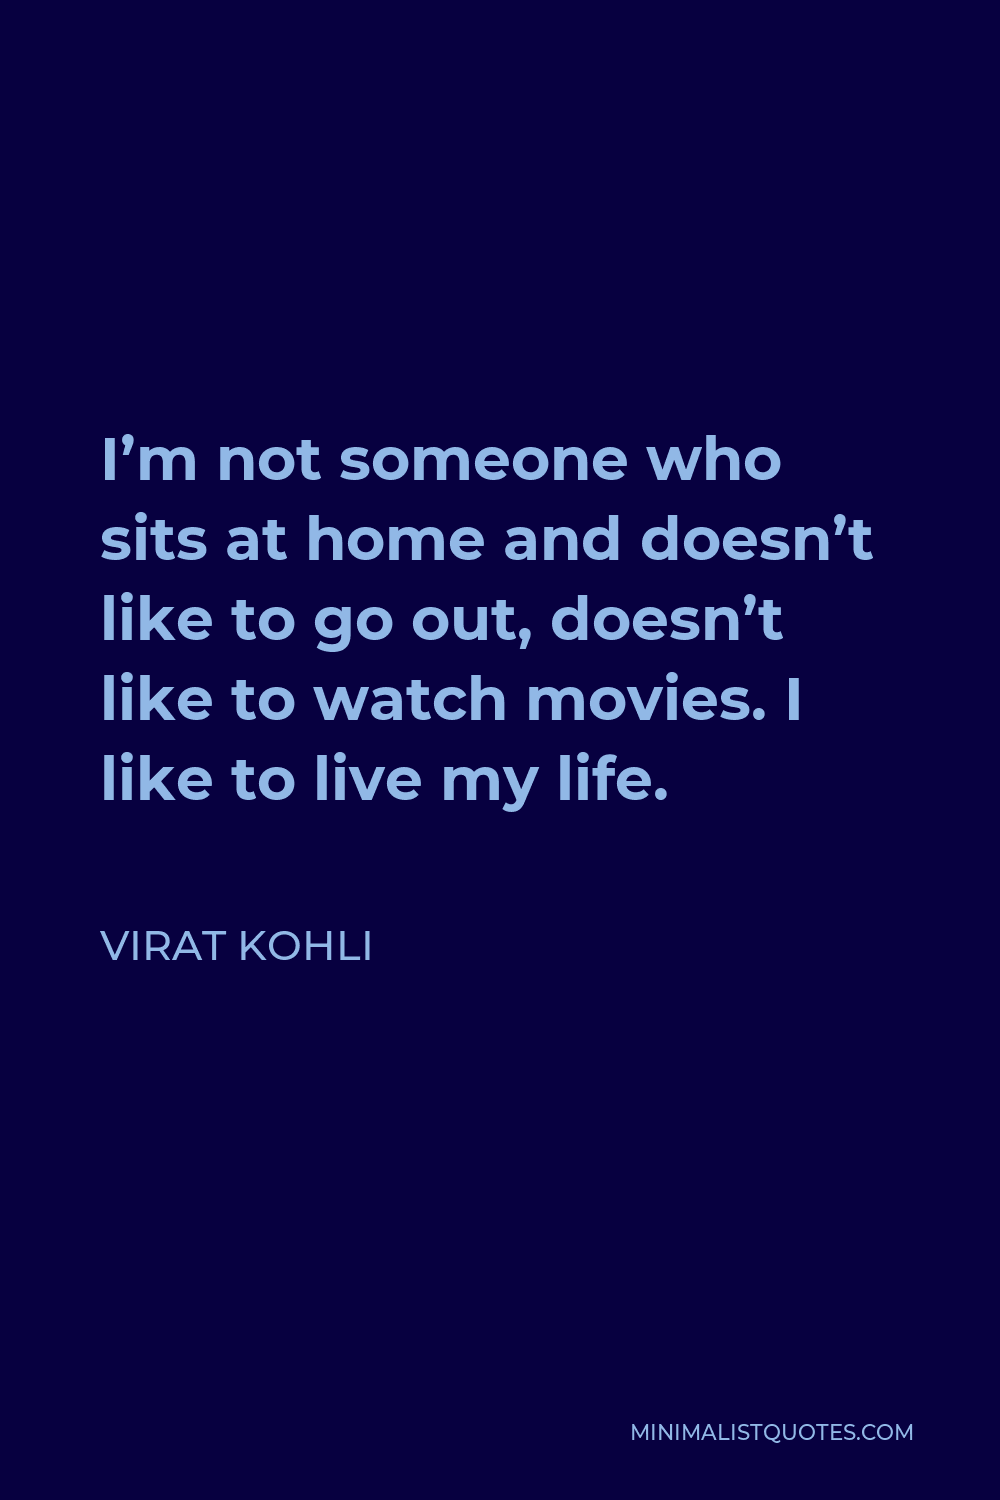 Virat Kohli Quote - I’m not someone who sits at home and doesn’t like to go out, doesn’t like to watch movies. I like to live my life.